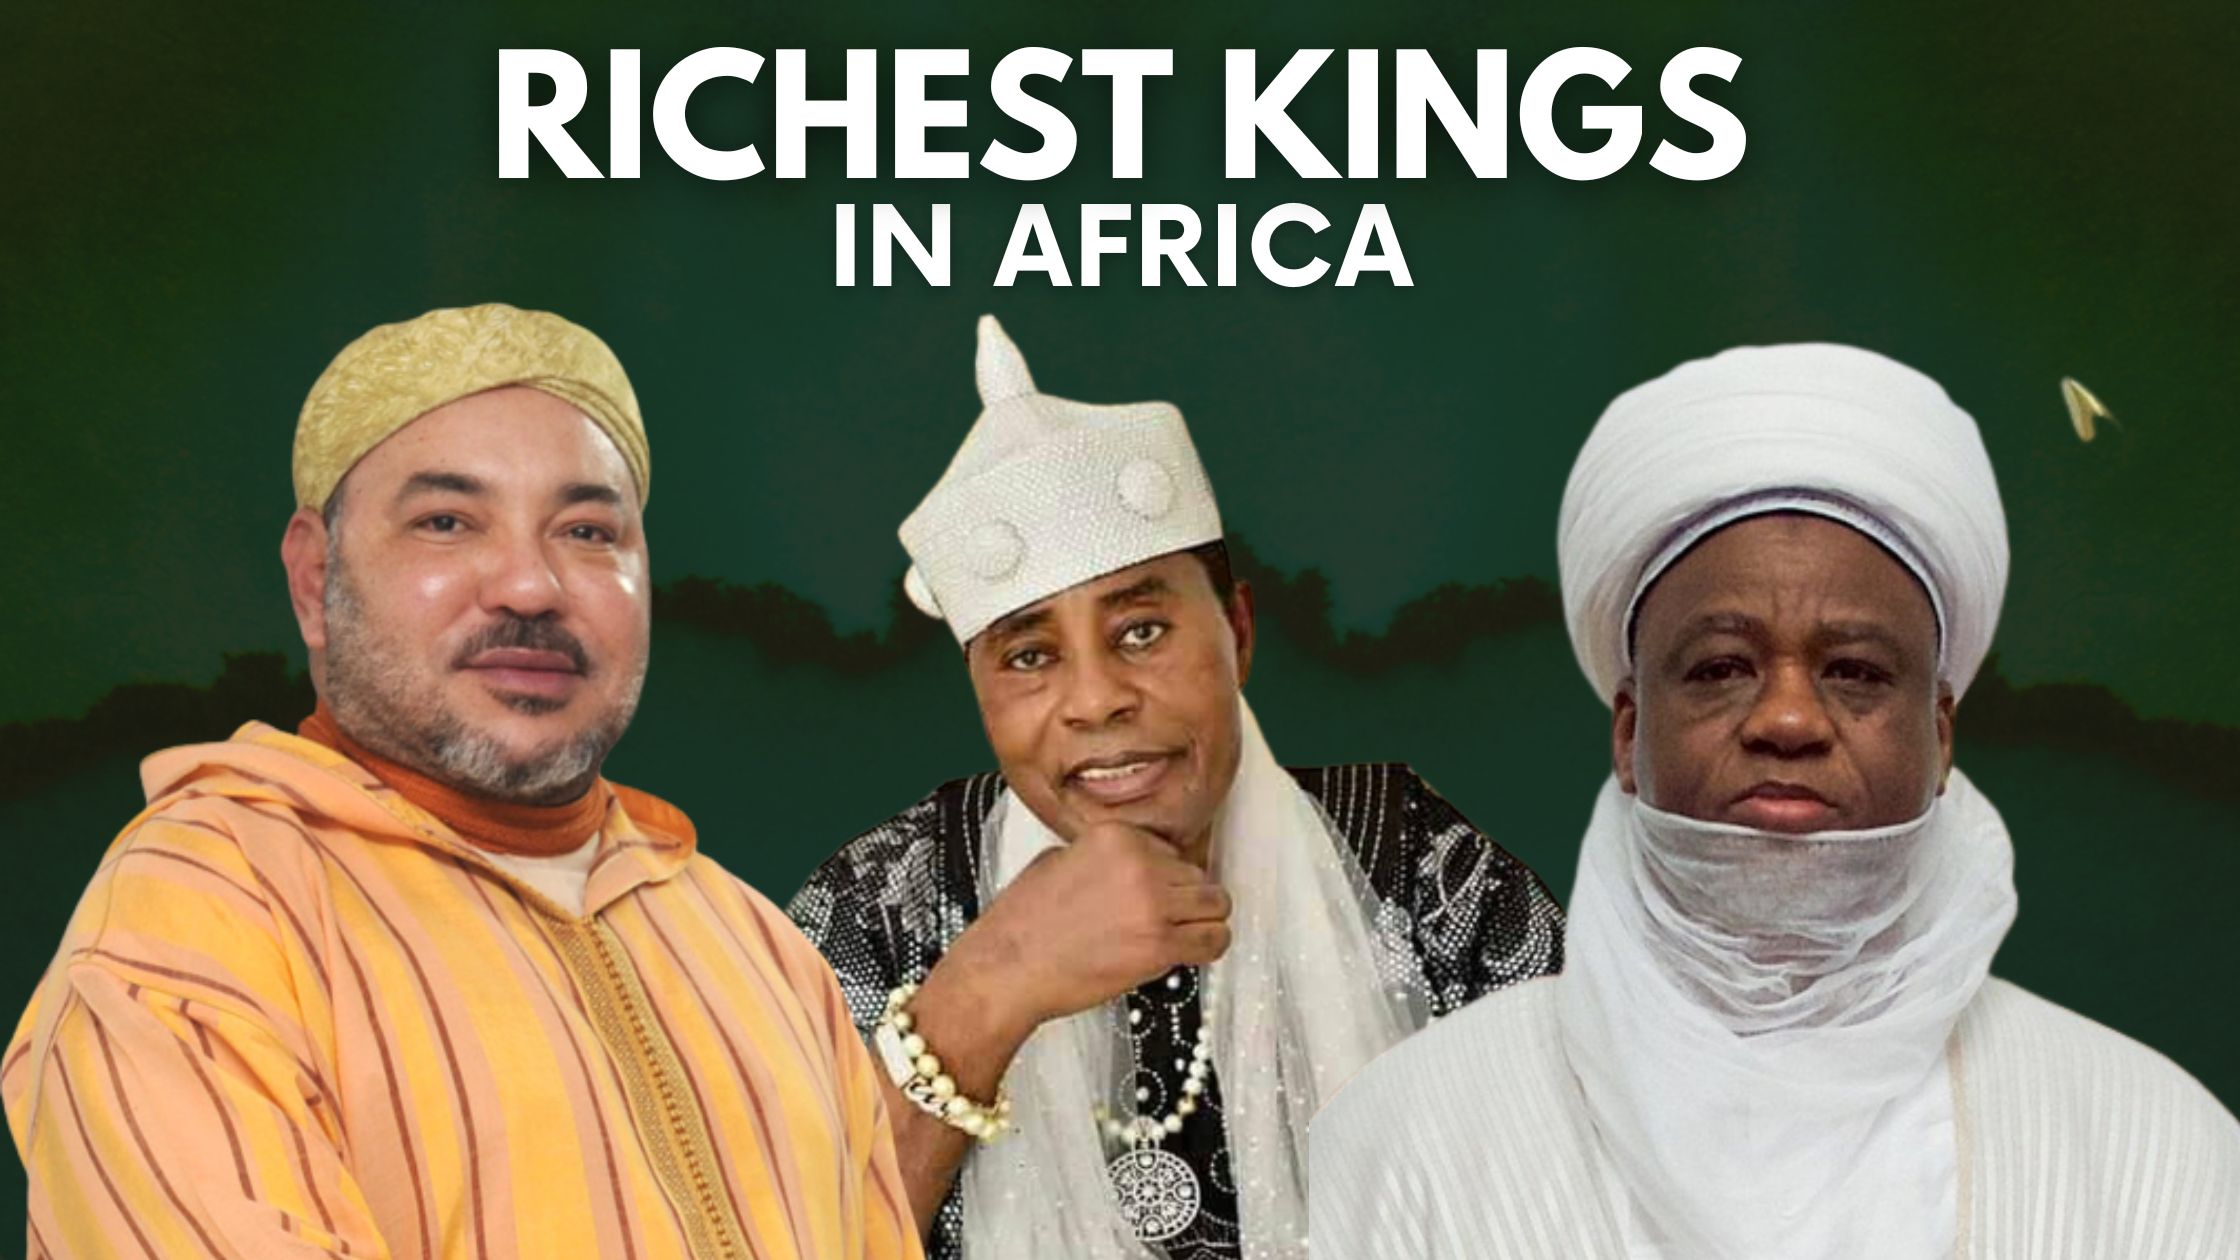 Top 10 Richest Kings In Africa (2022)